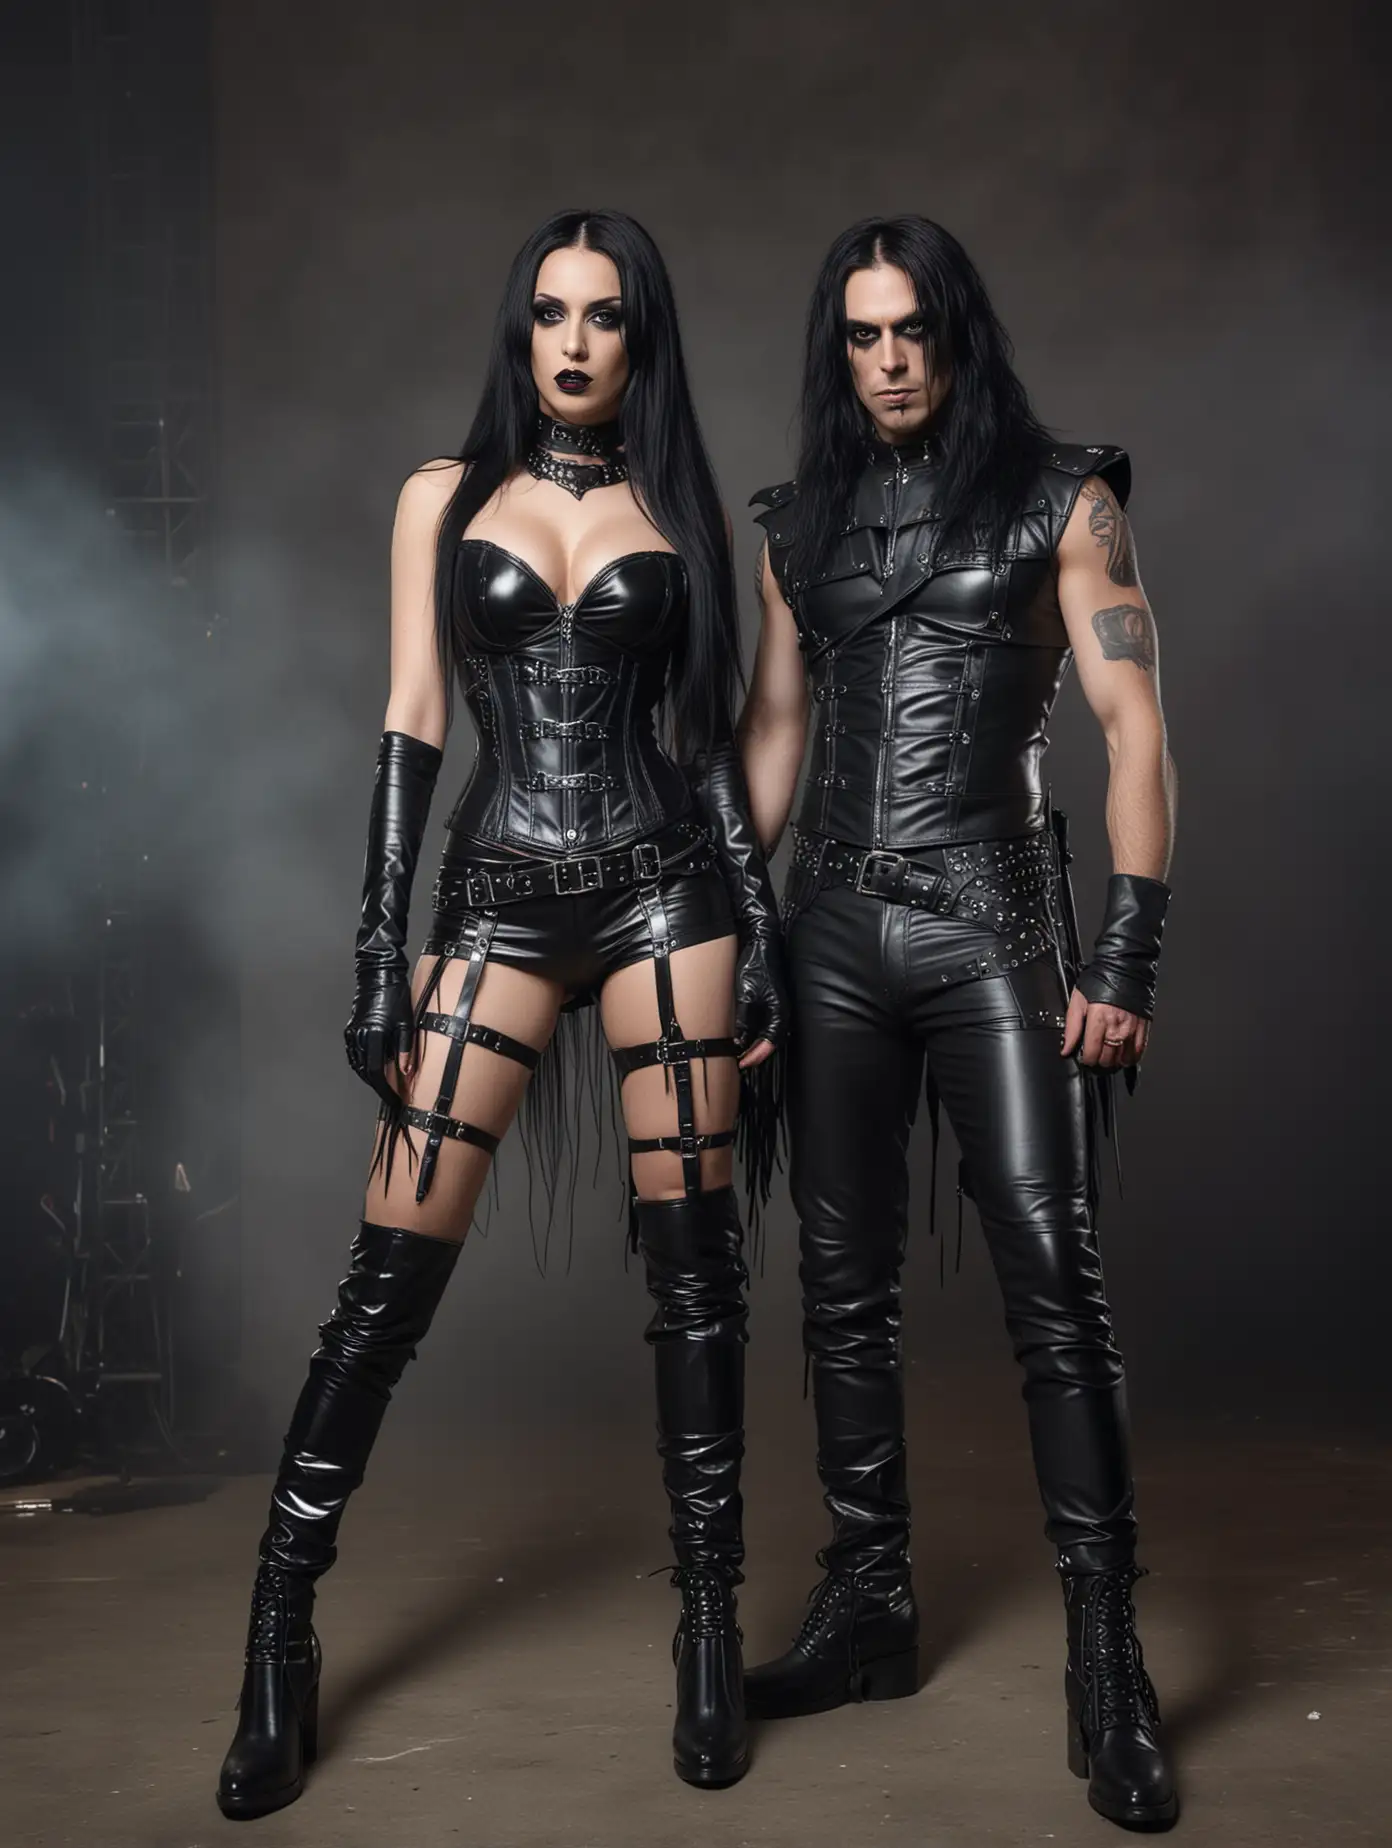 Gothic Woman and Black Metalhead Rocker in Concert